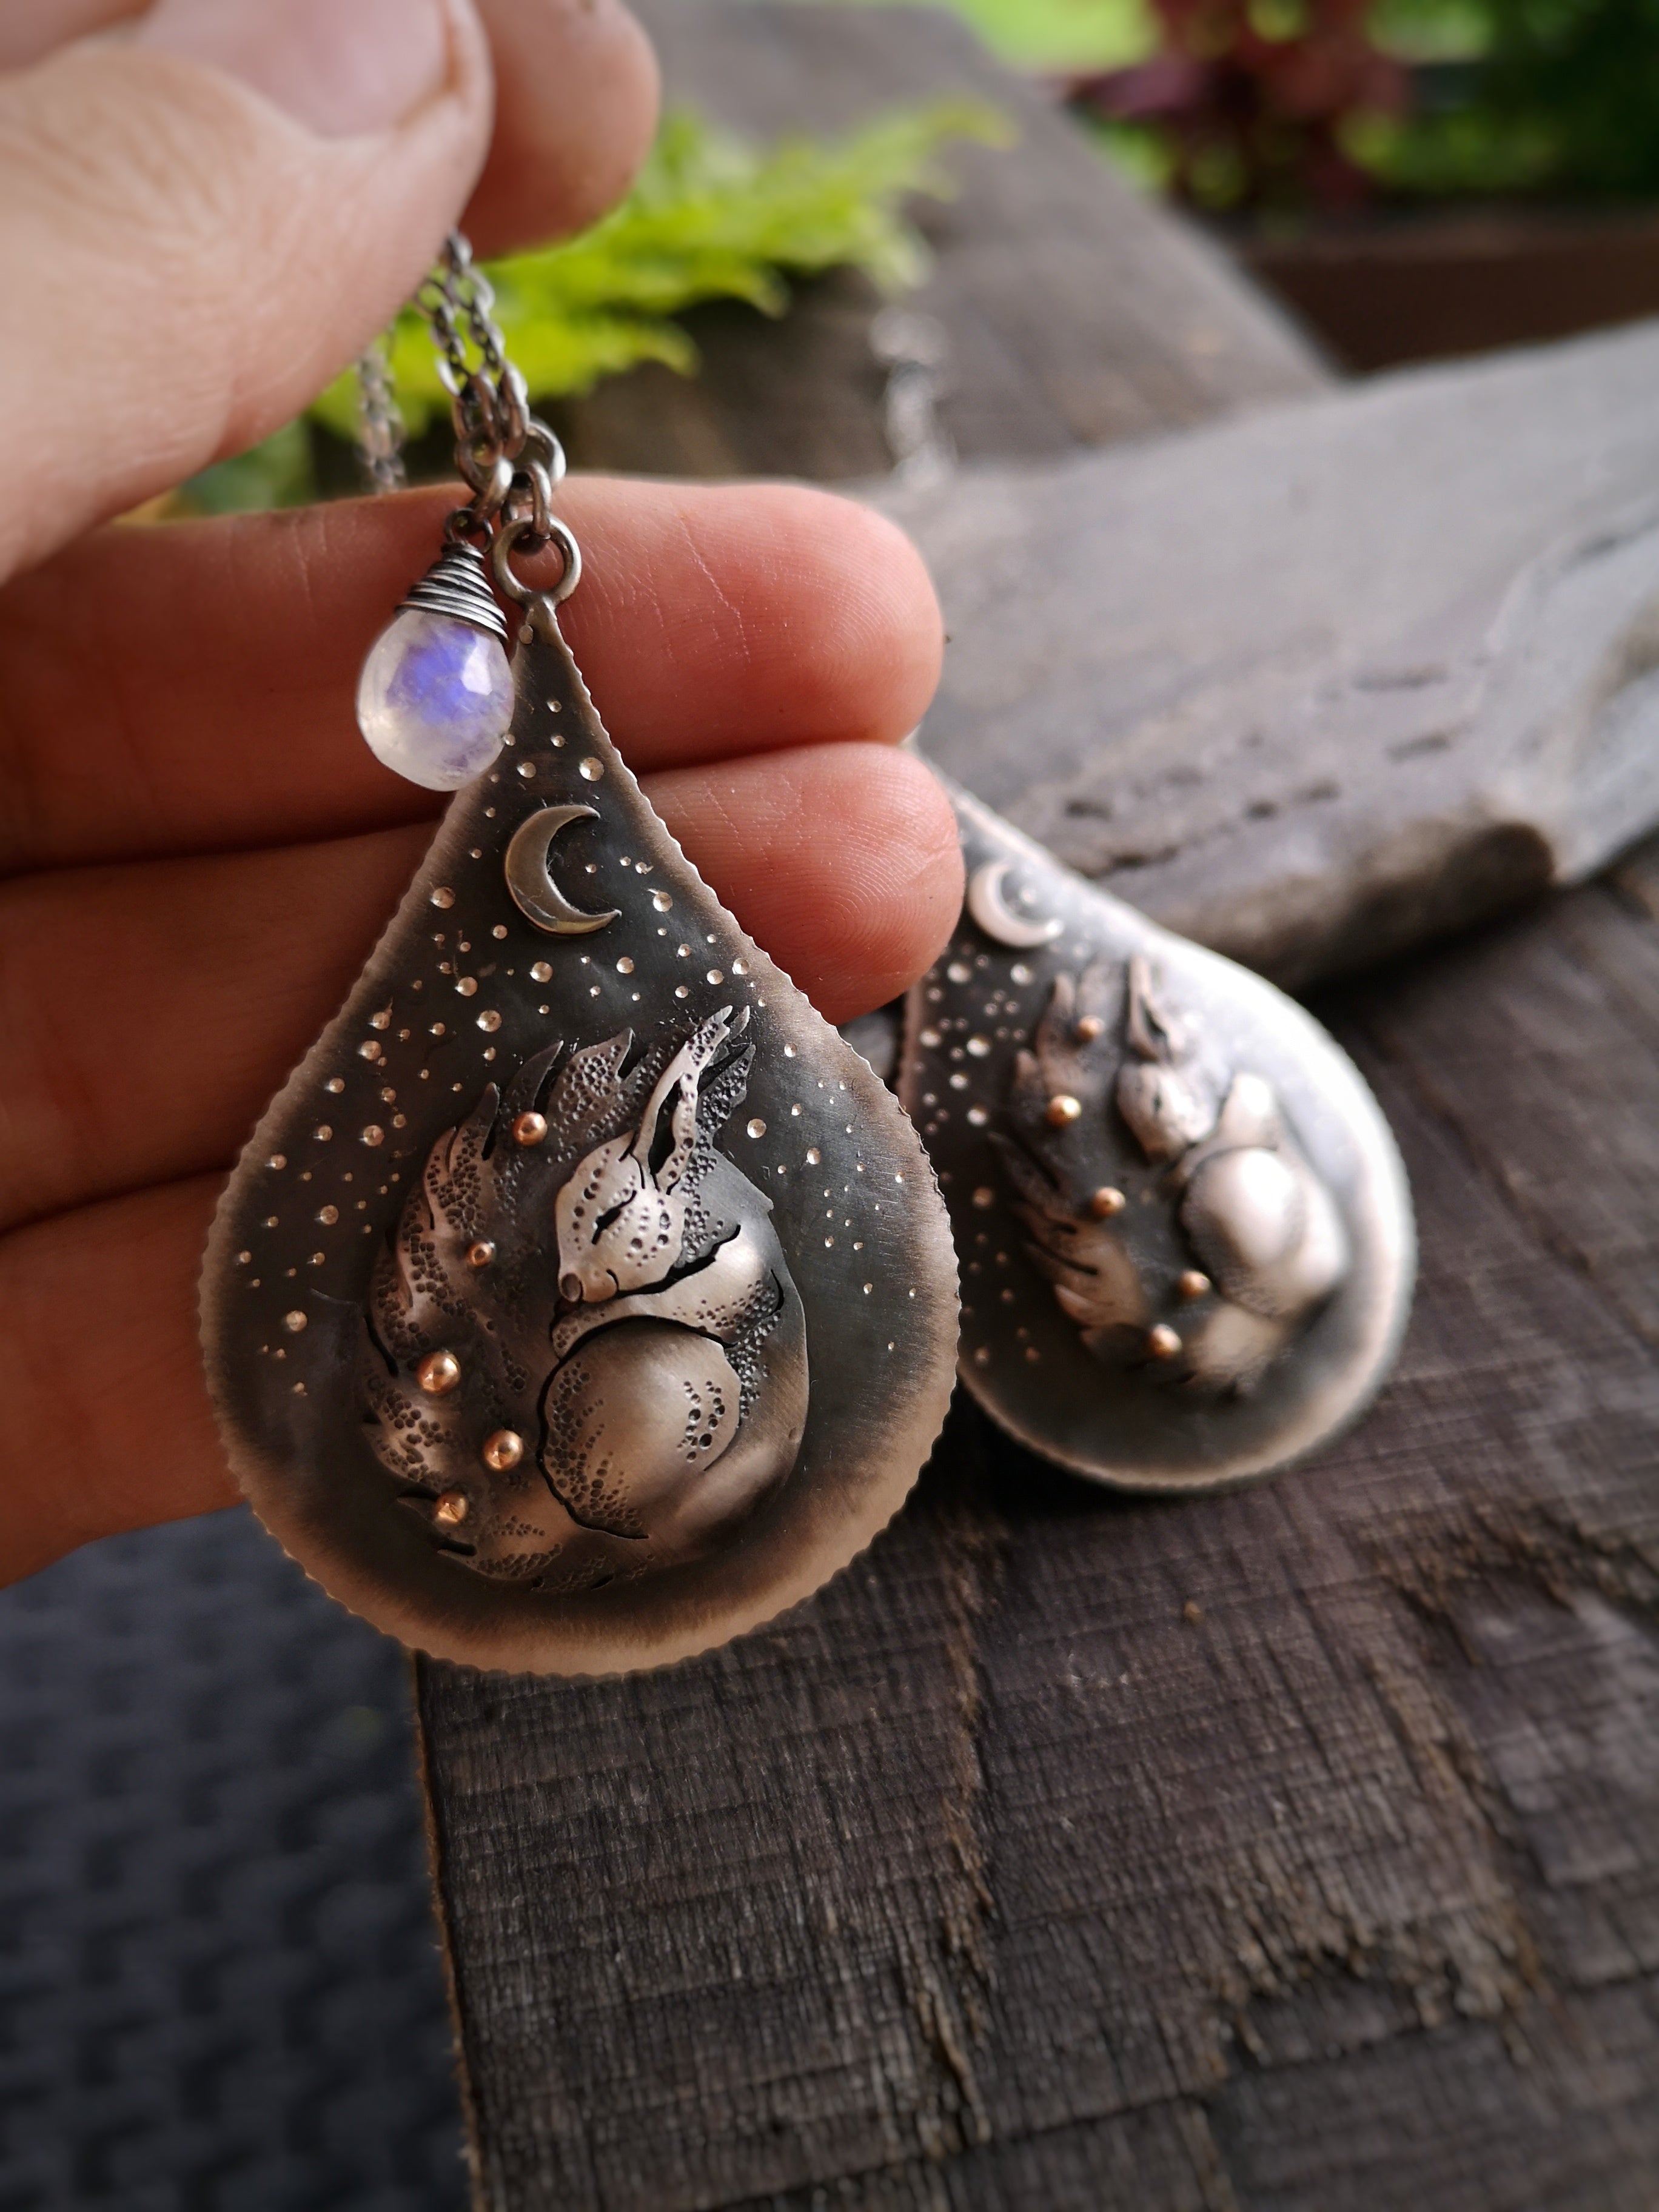 The Sleeping Squirrel Necklace I